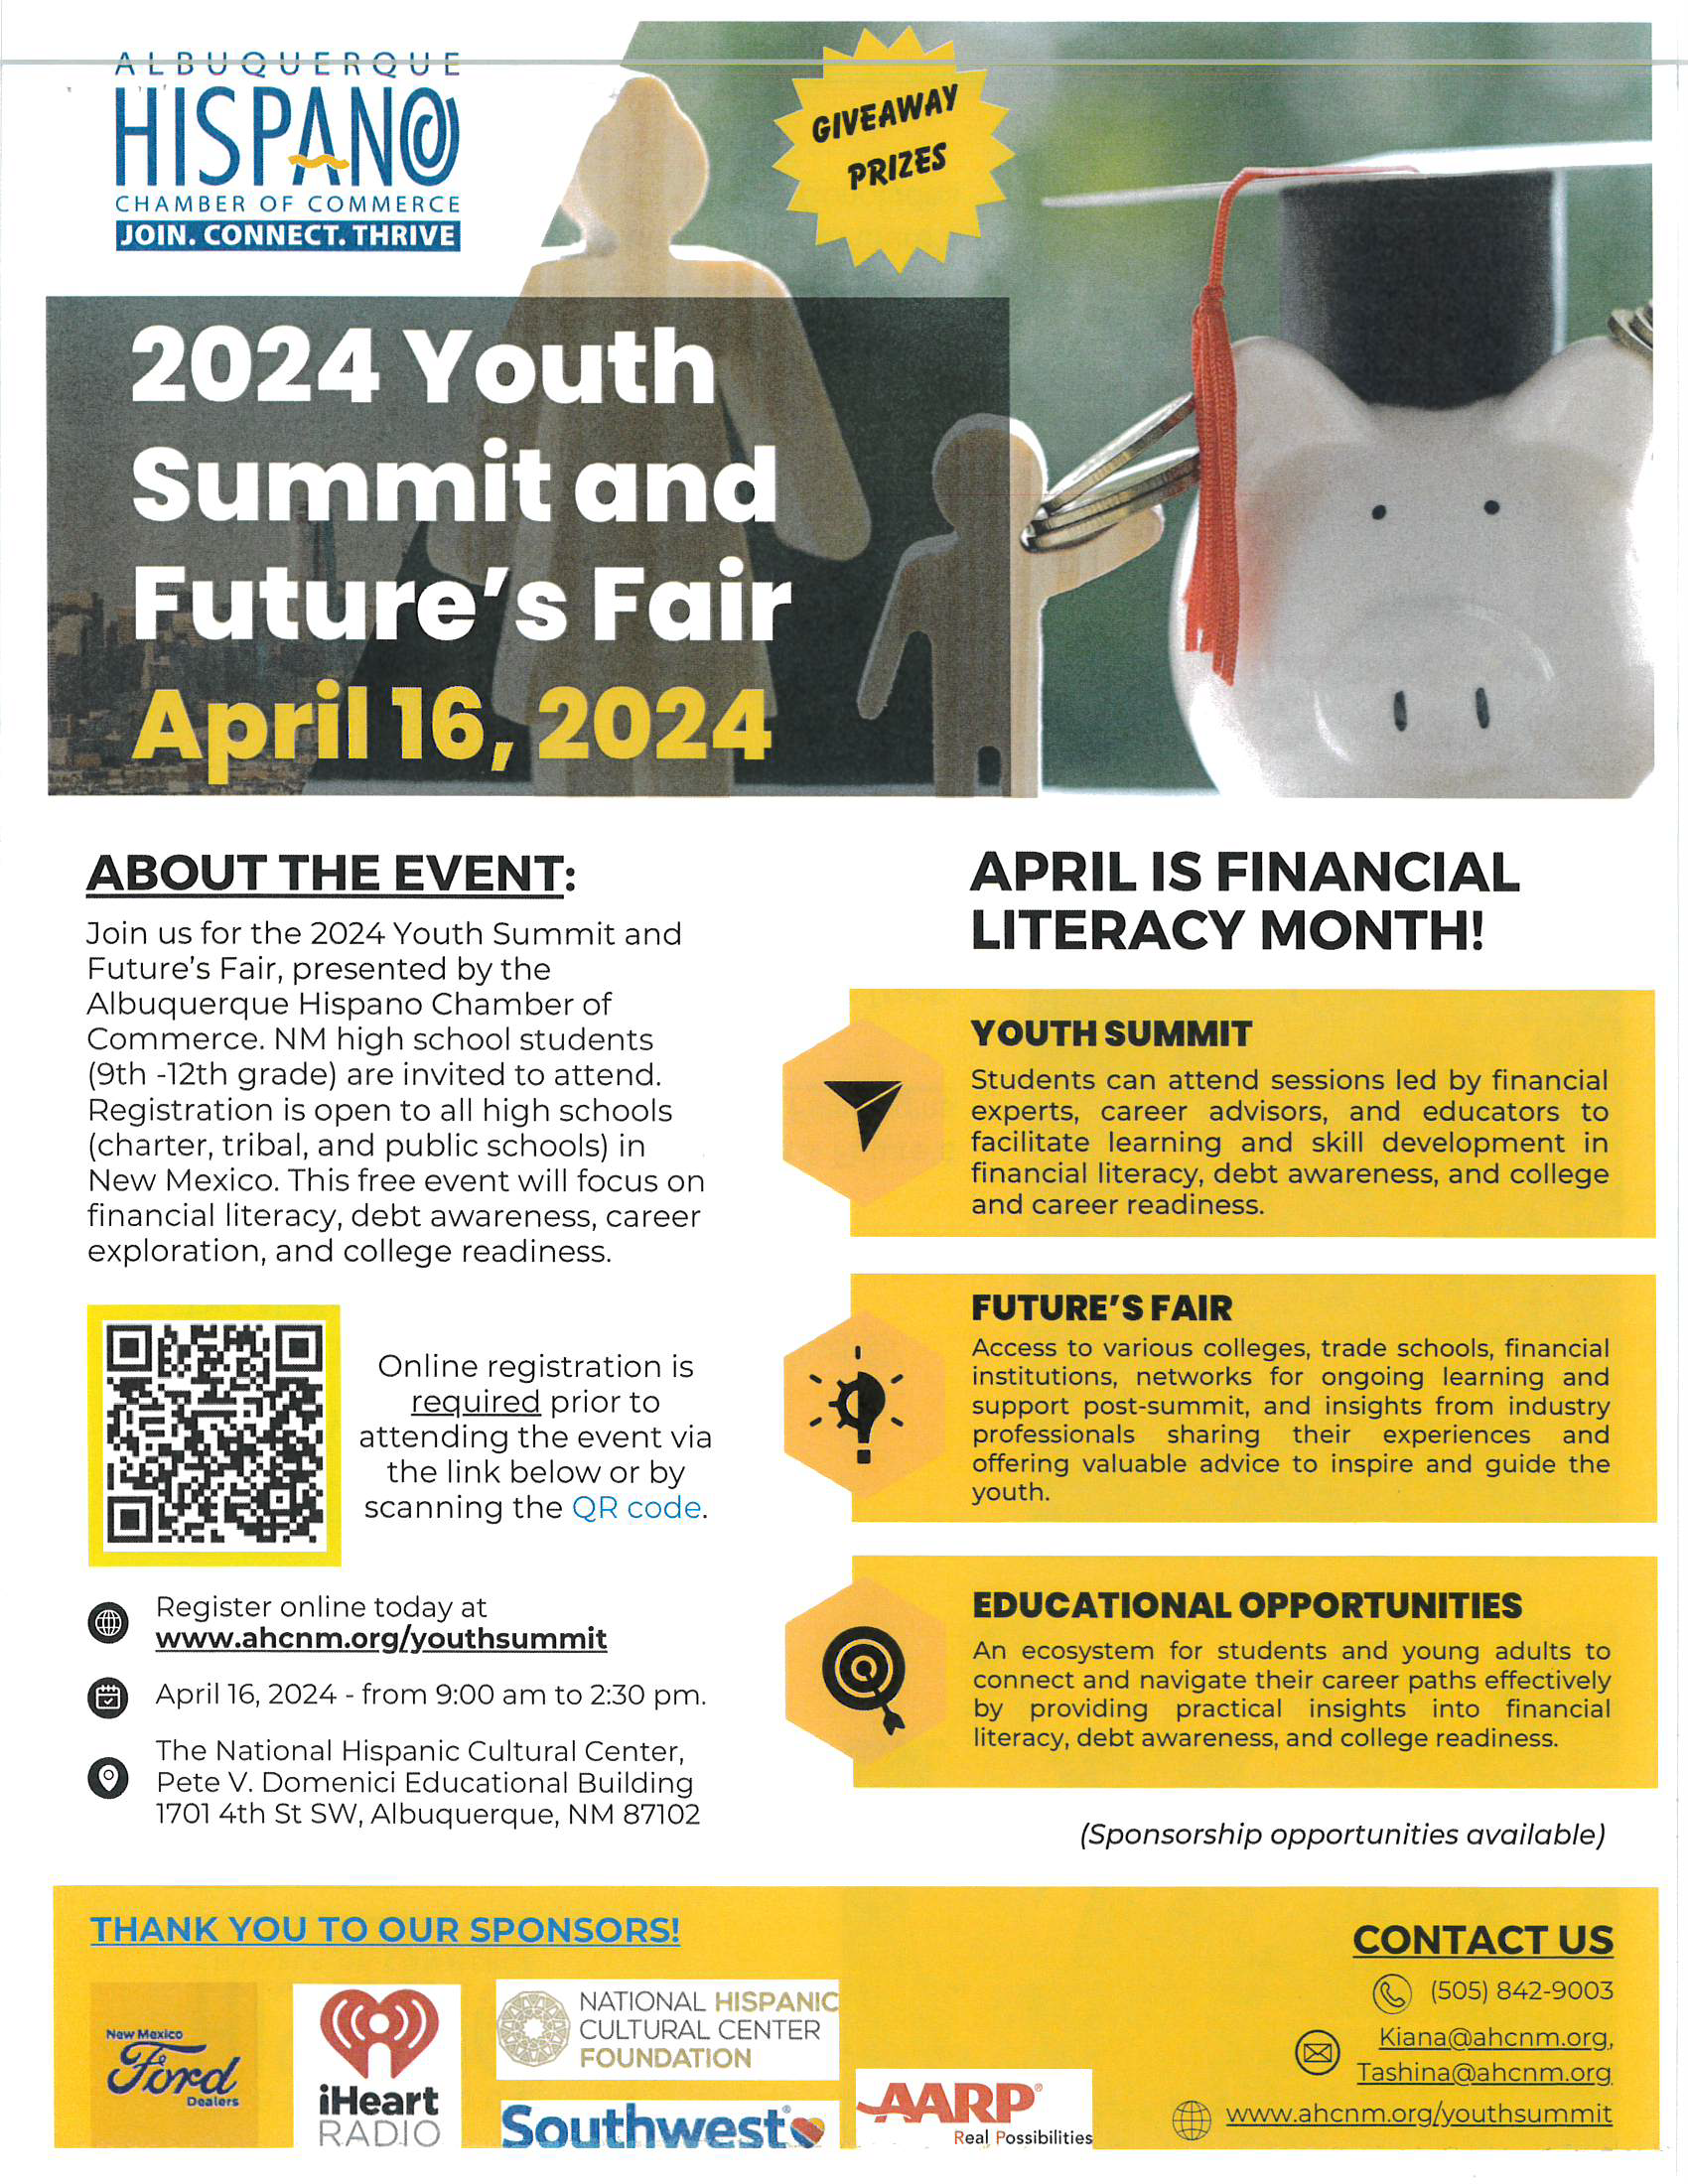 Albuquerque Hispano Chamber of Commerce 2024 Youth Summit and Future's Fair flyer